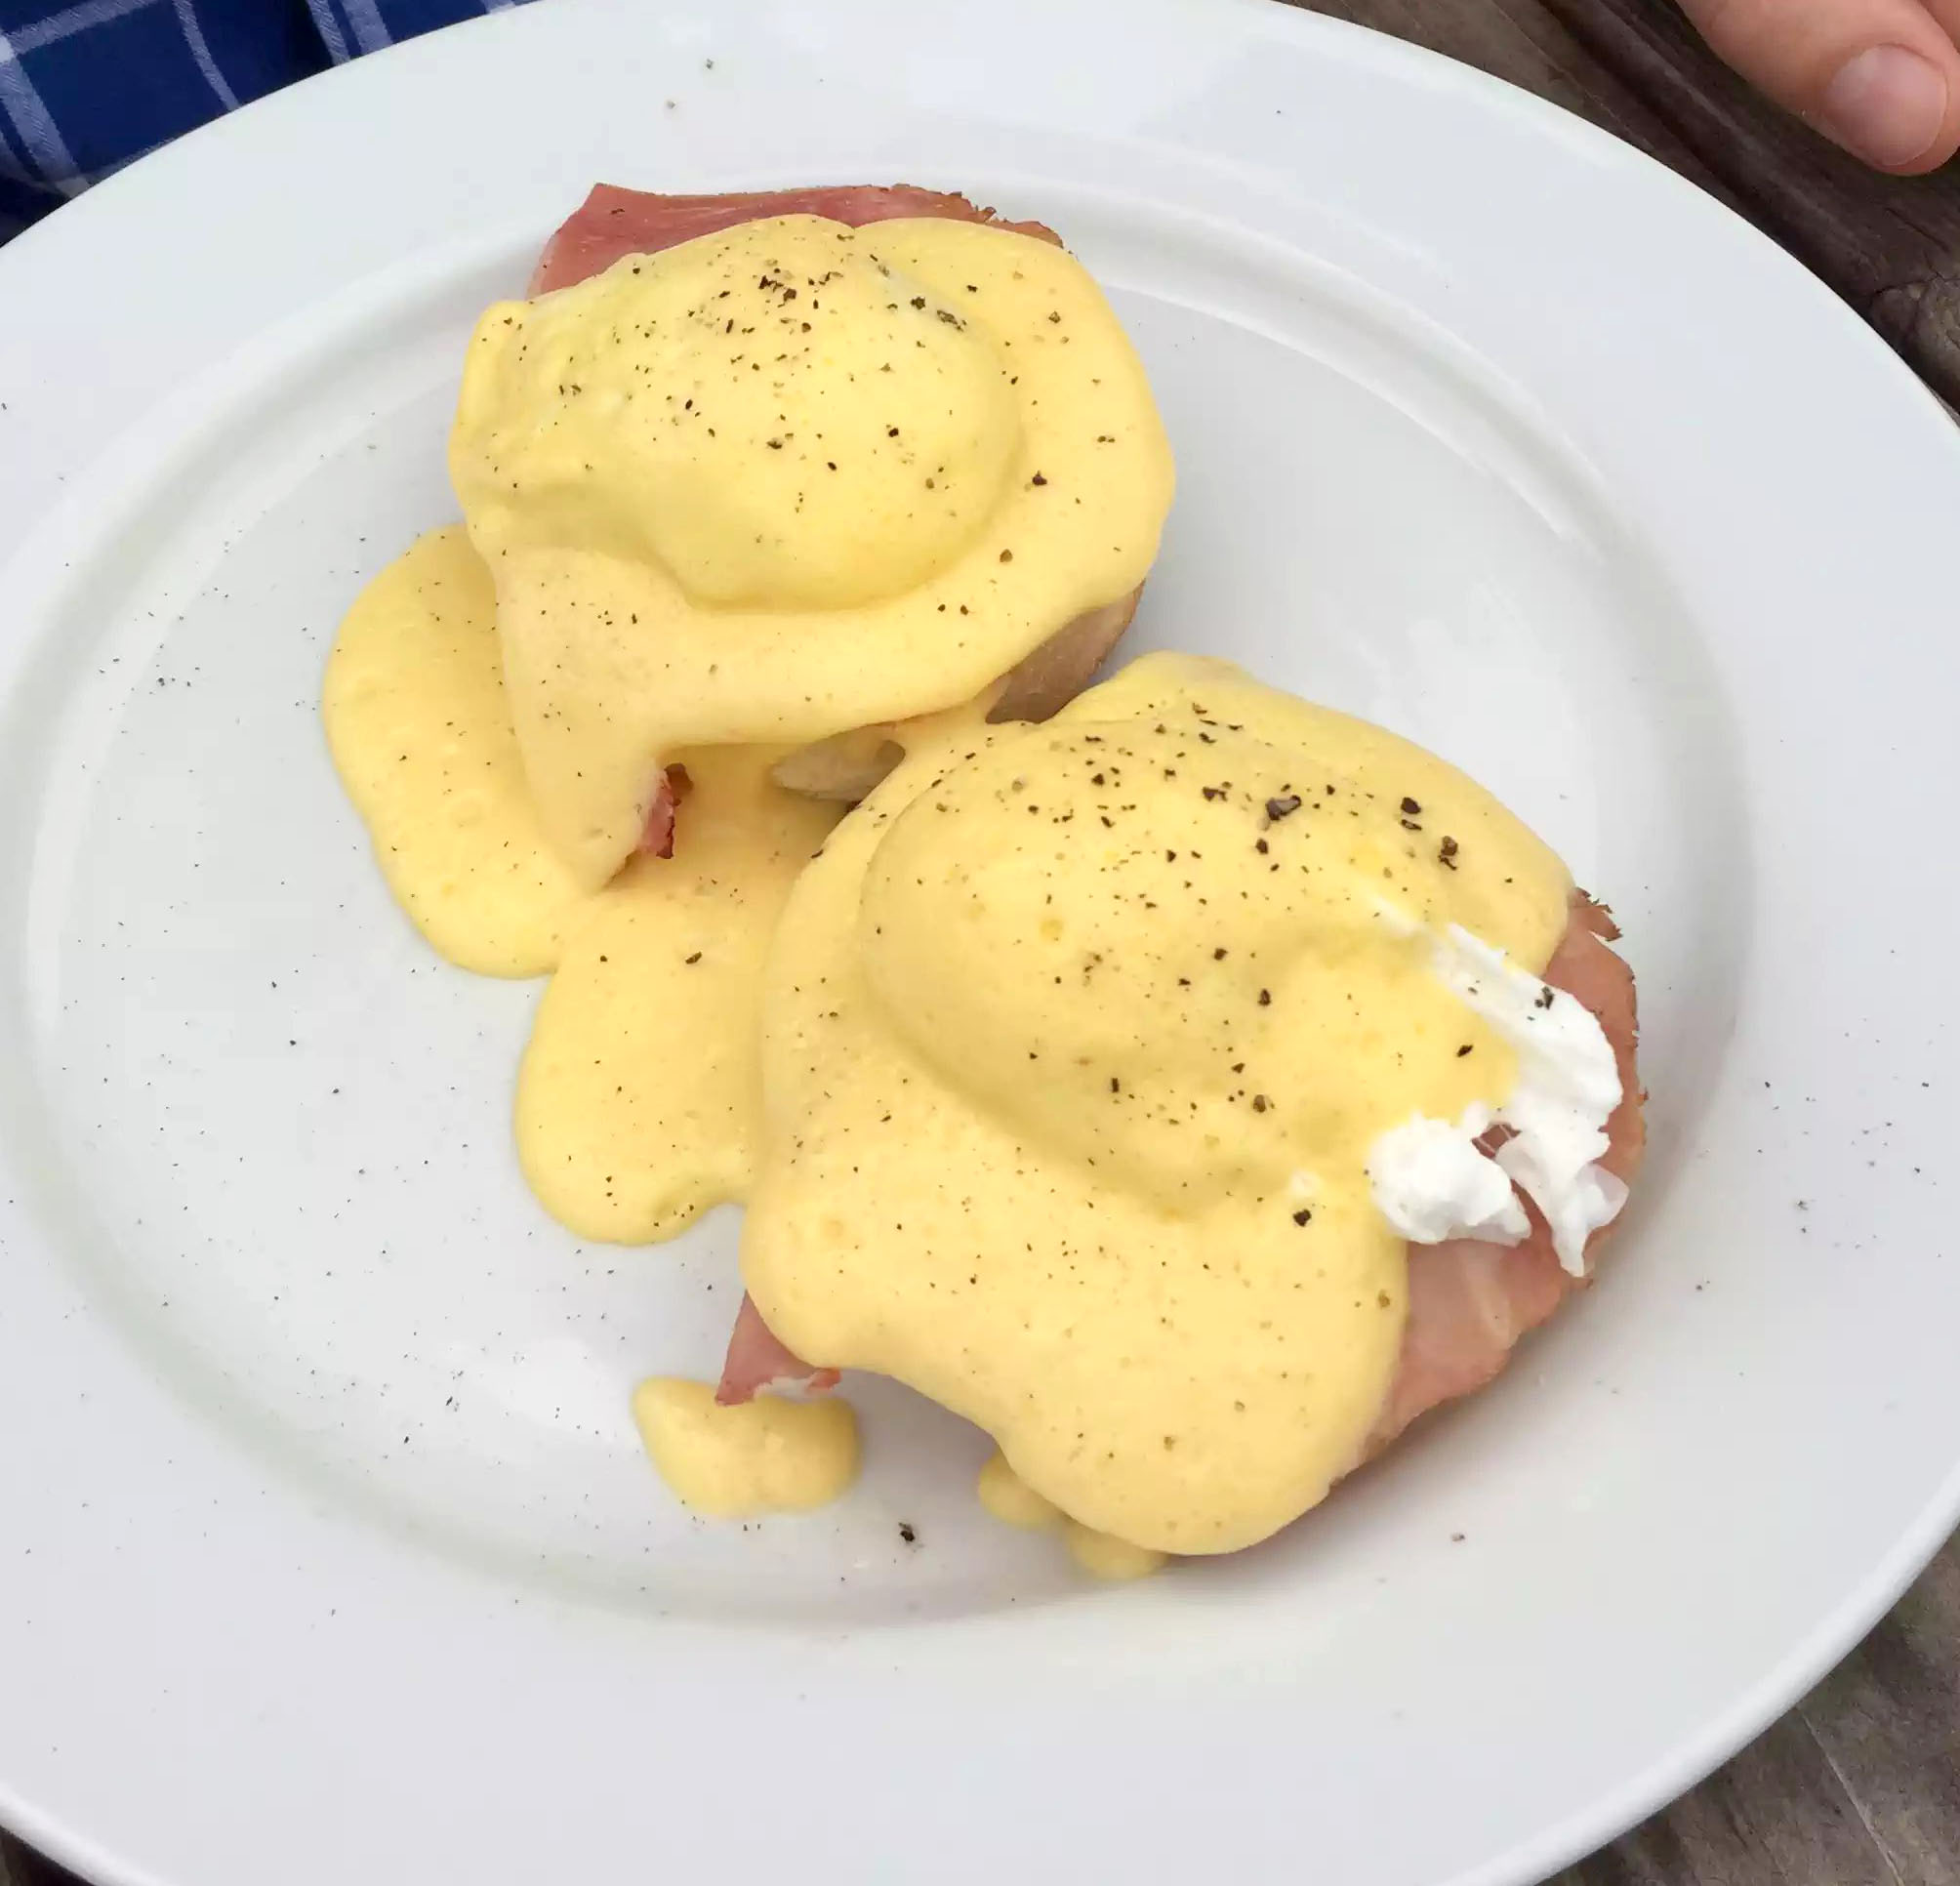 Skylark Cafe Restaurant Wandsworth Common Lunch Drinks Eggs Benedict Muffin Poached HOLLANDAISE